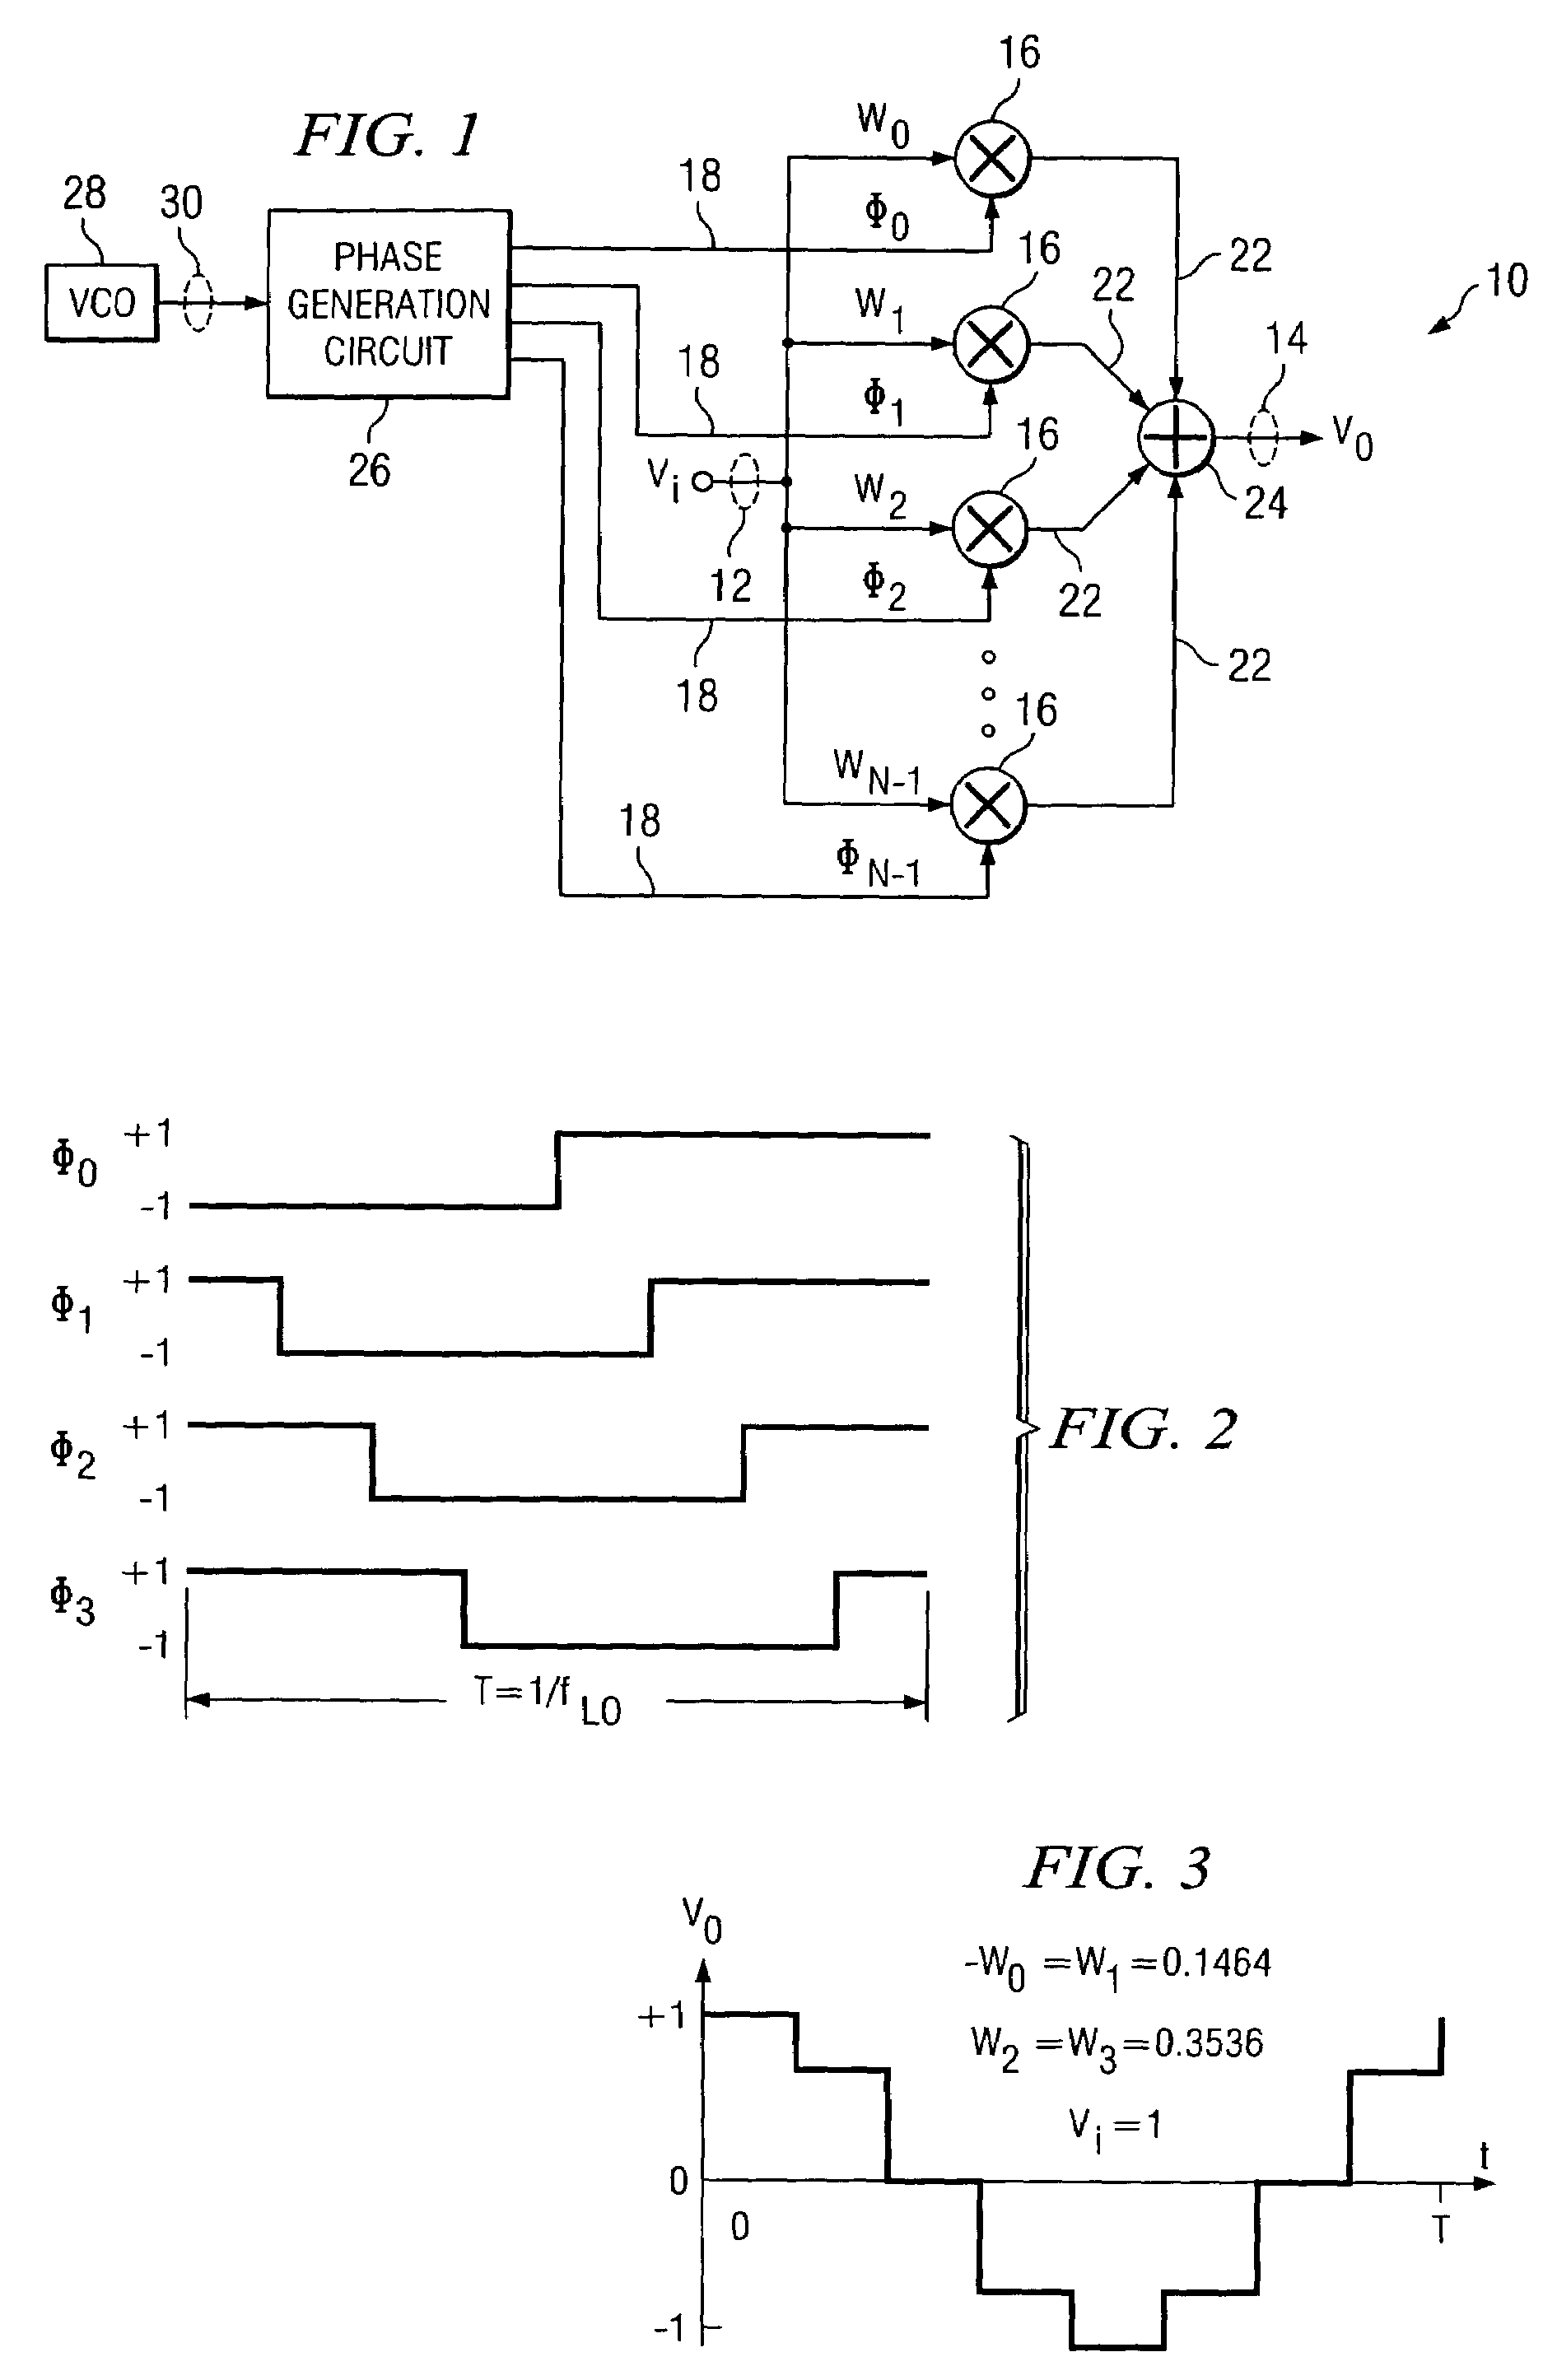 System and method for frequency translation with harmonic suppression using mixer stages